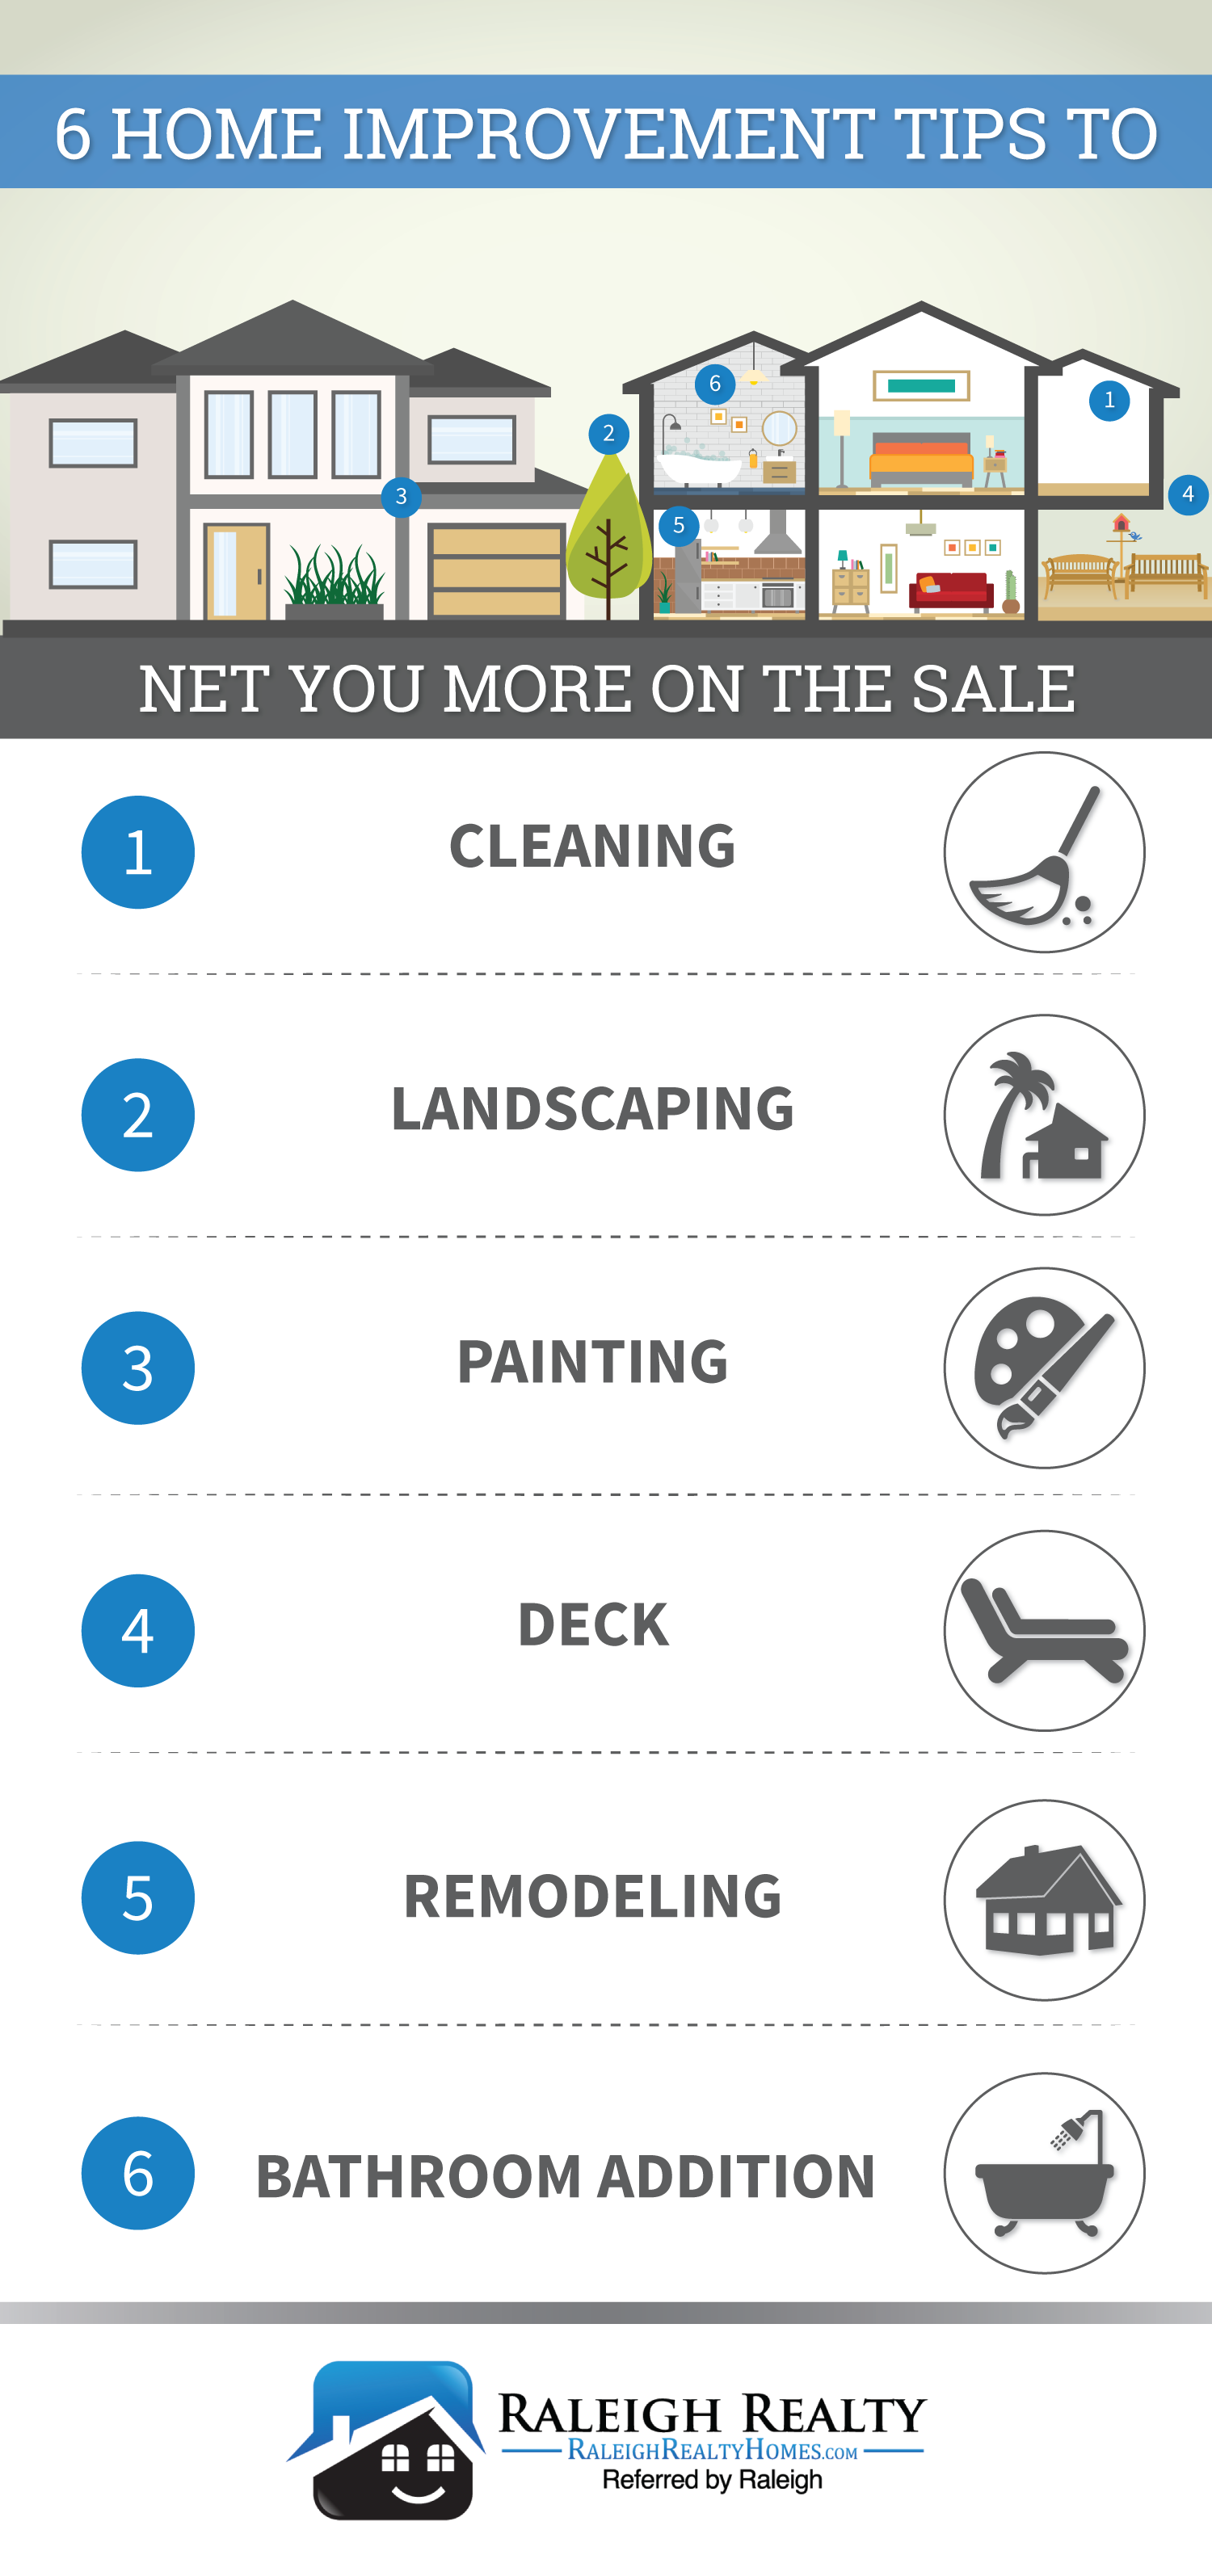 Home Improvements to Sell for More Money Infographic